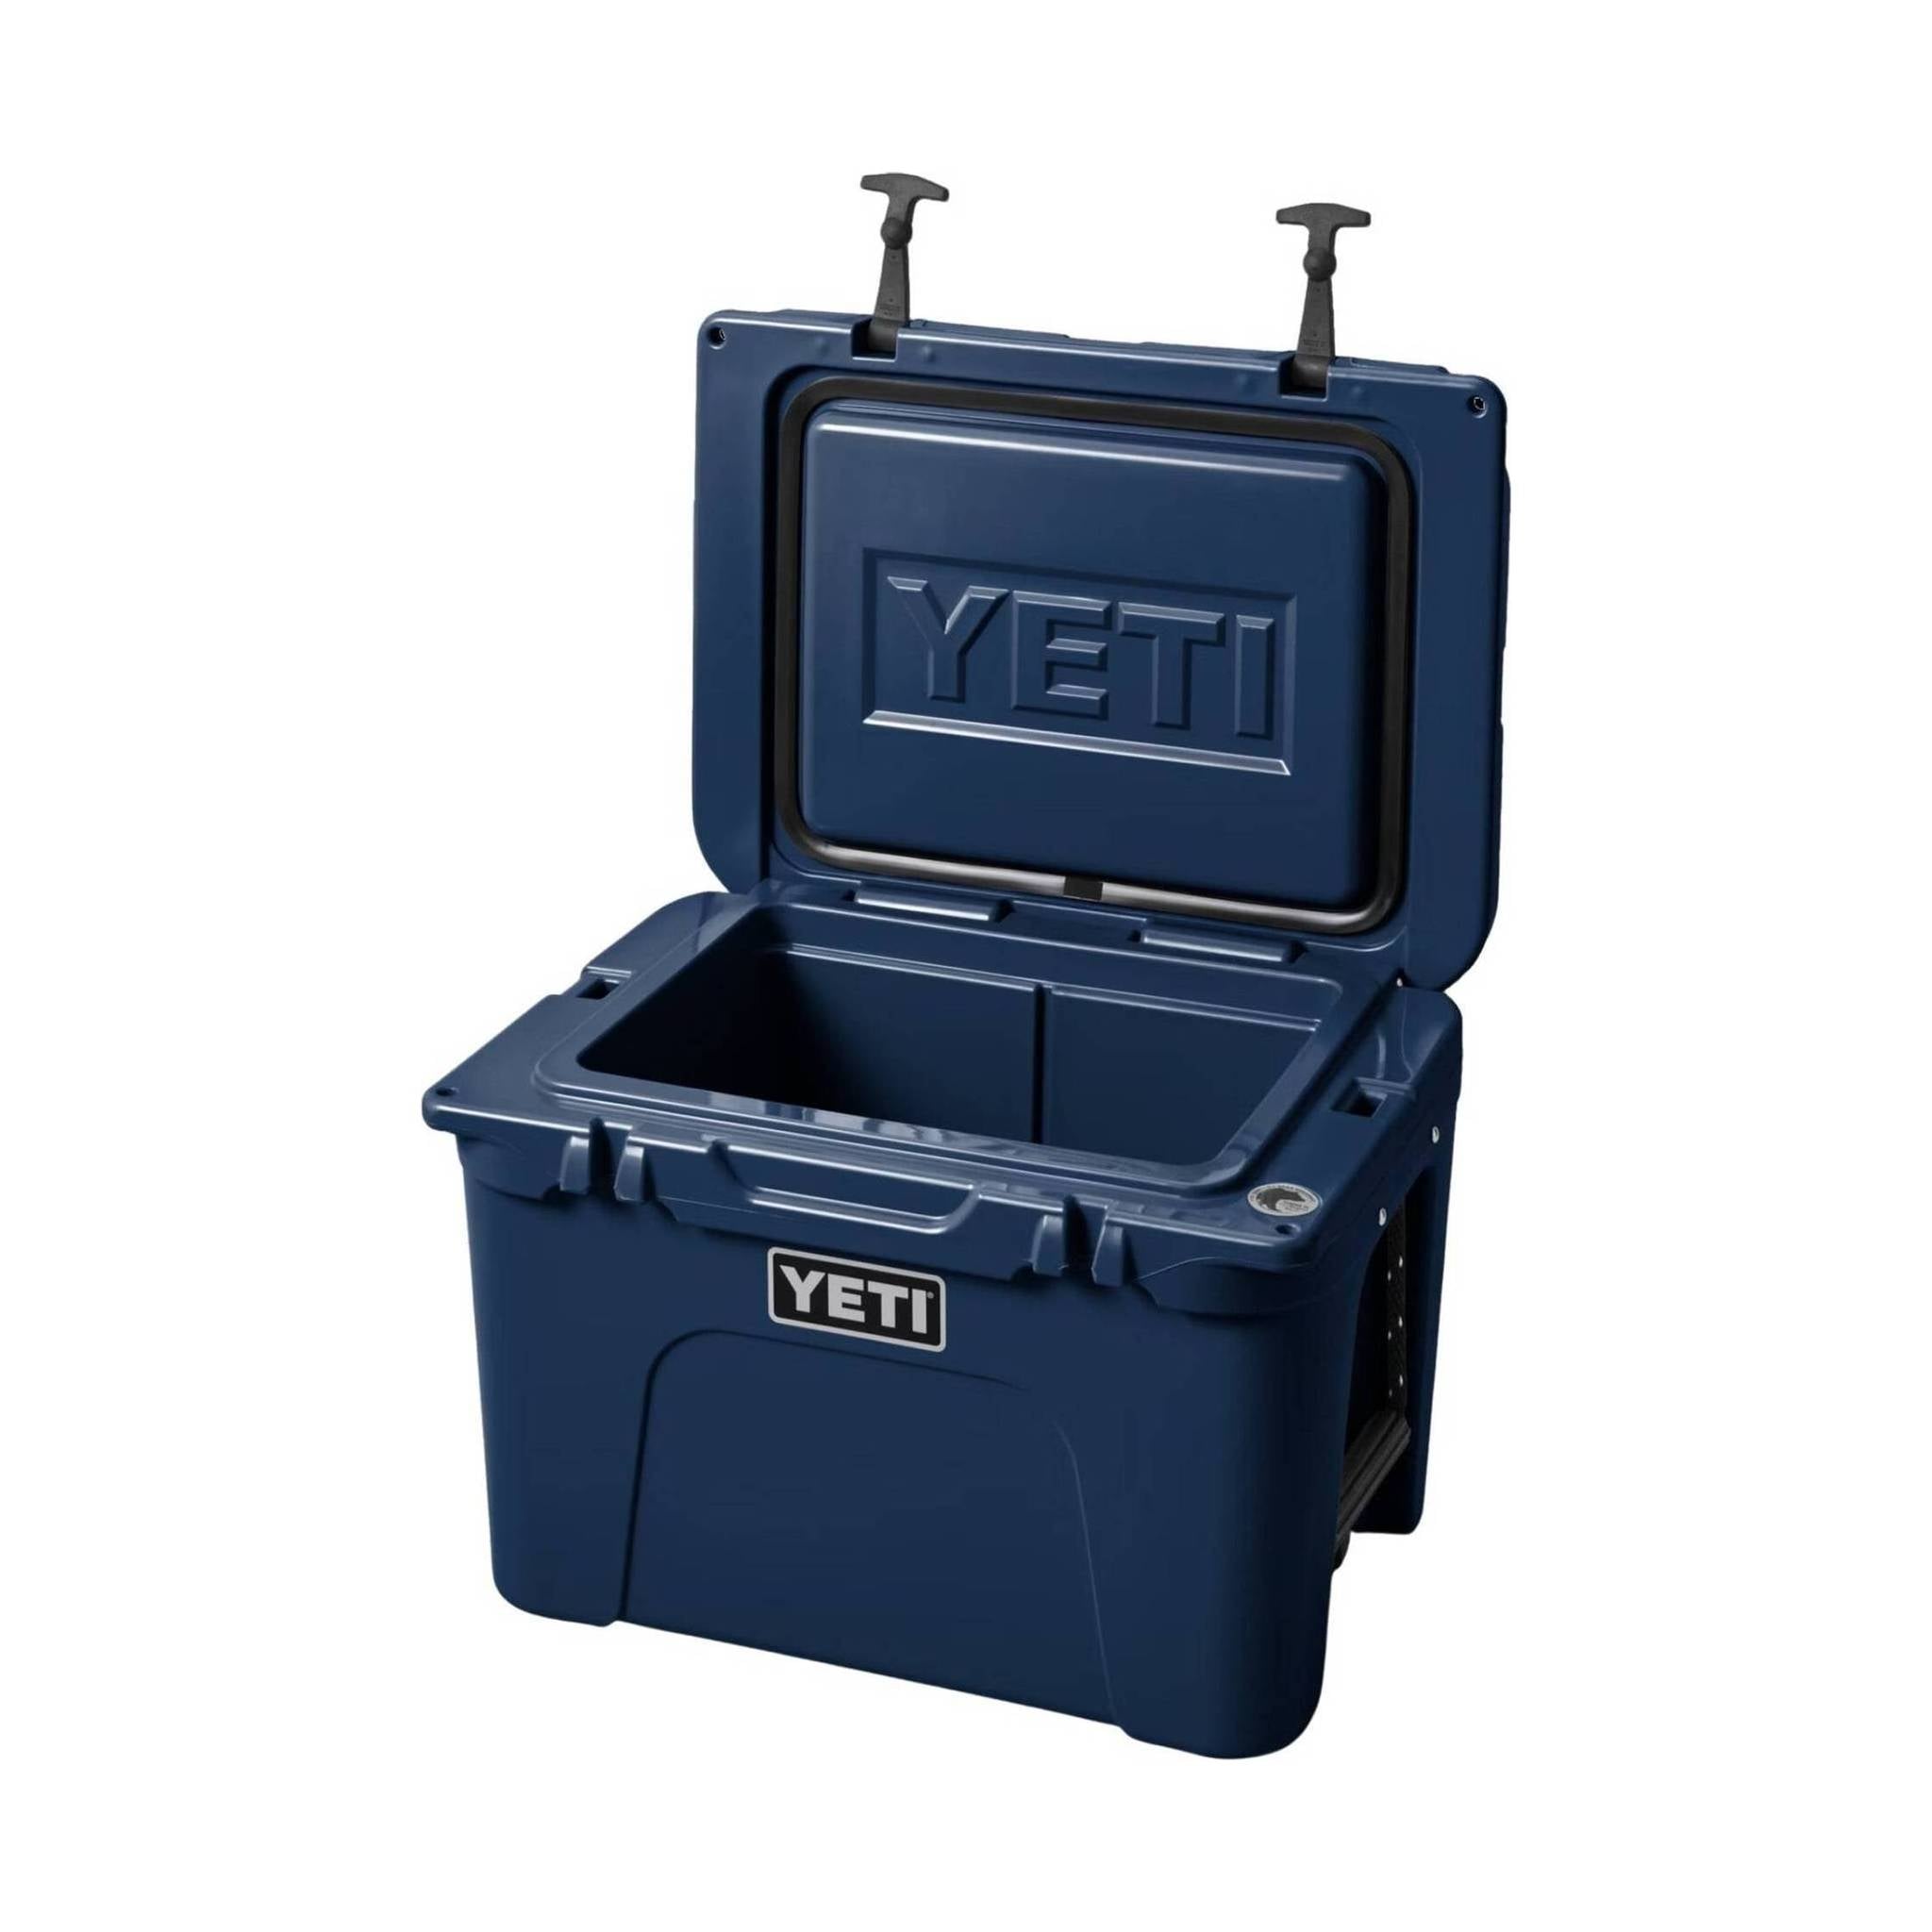 Unleash the Adventure: YETI Products for Dogs – Stones Boatyard